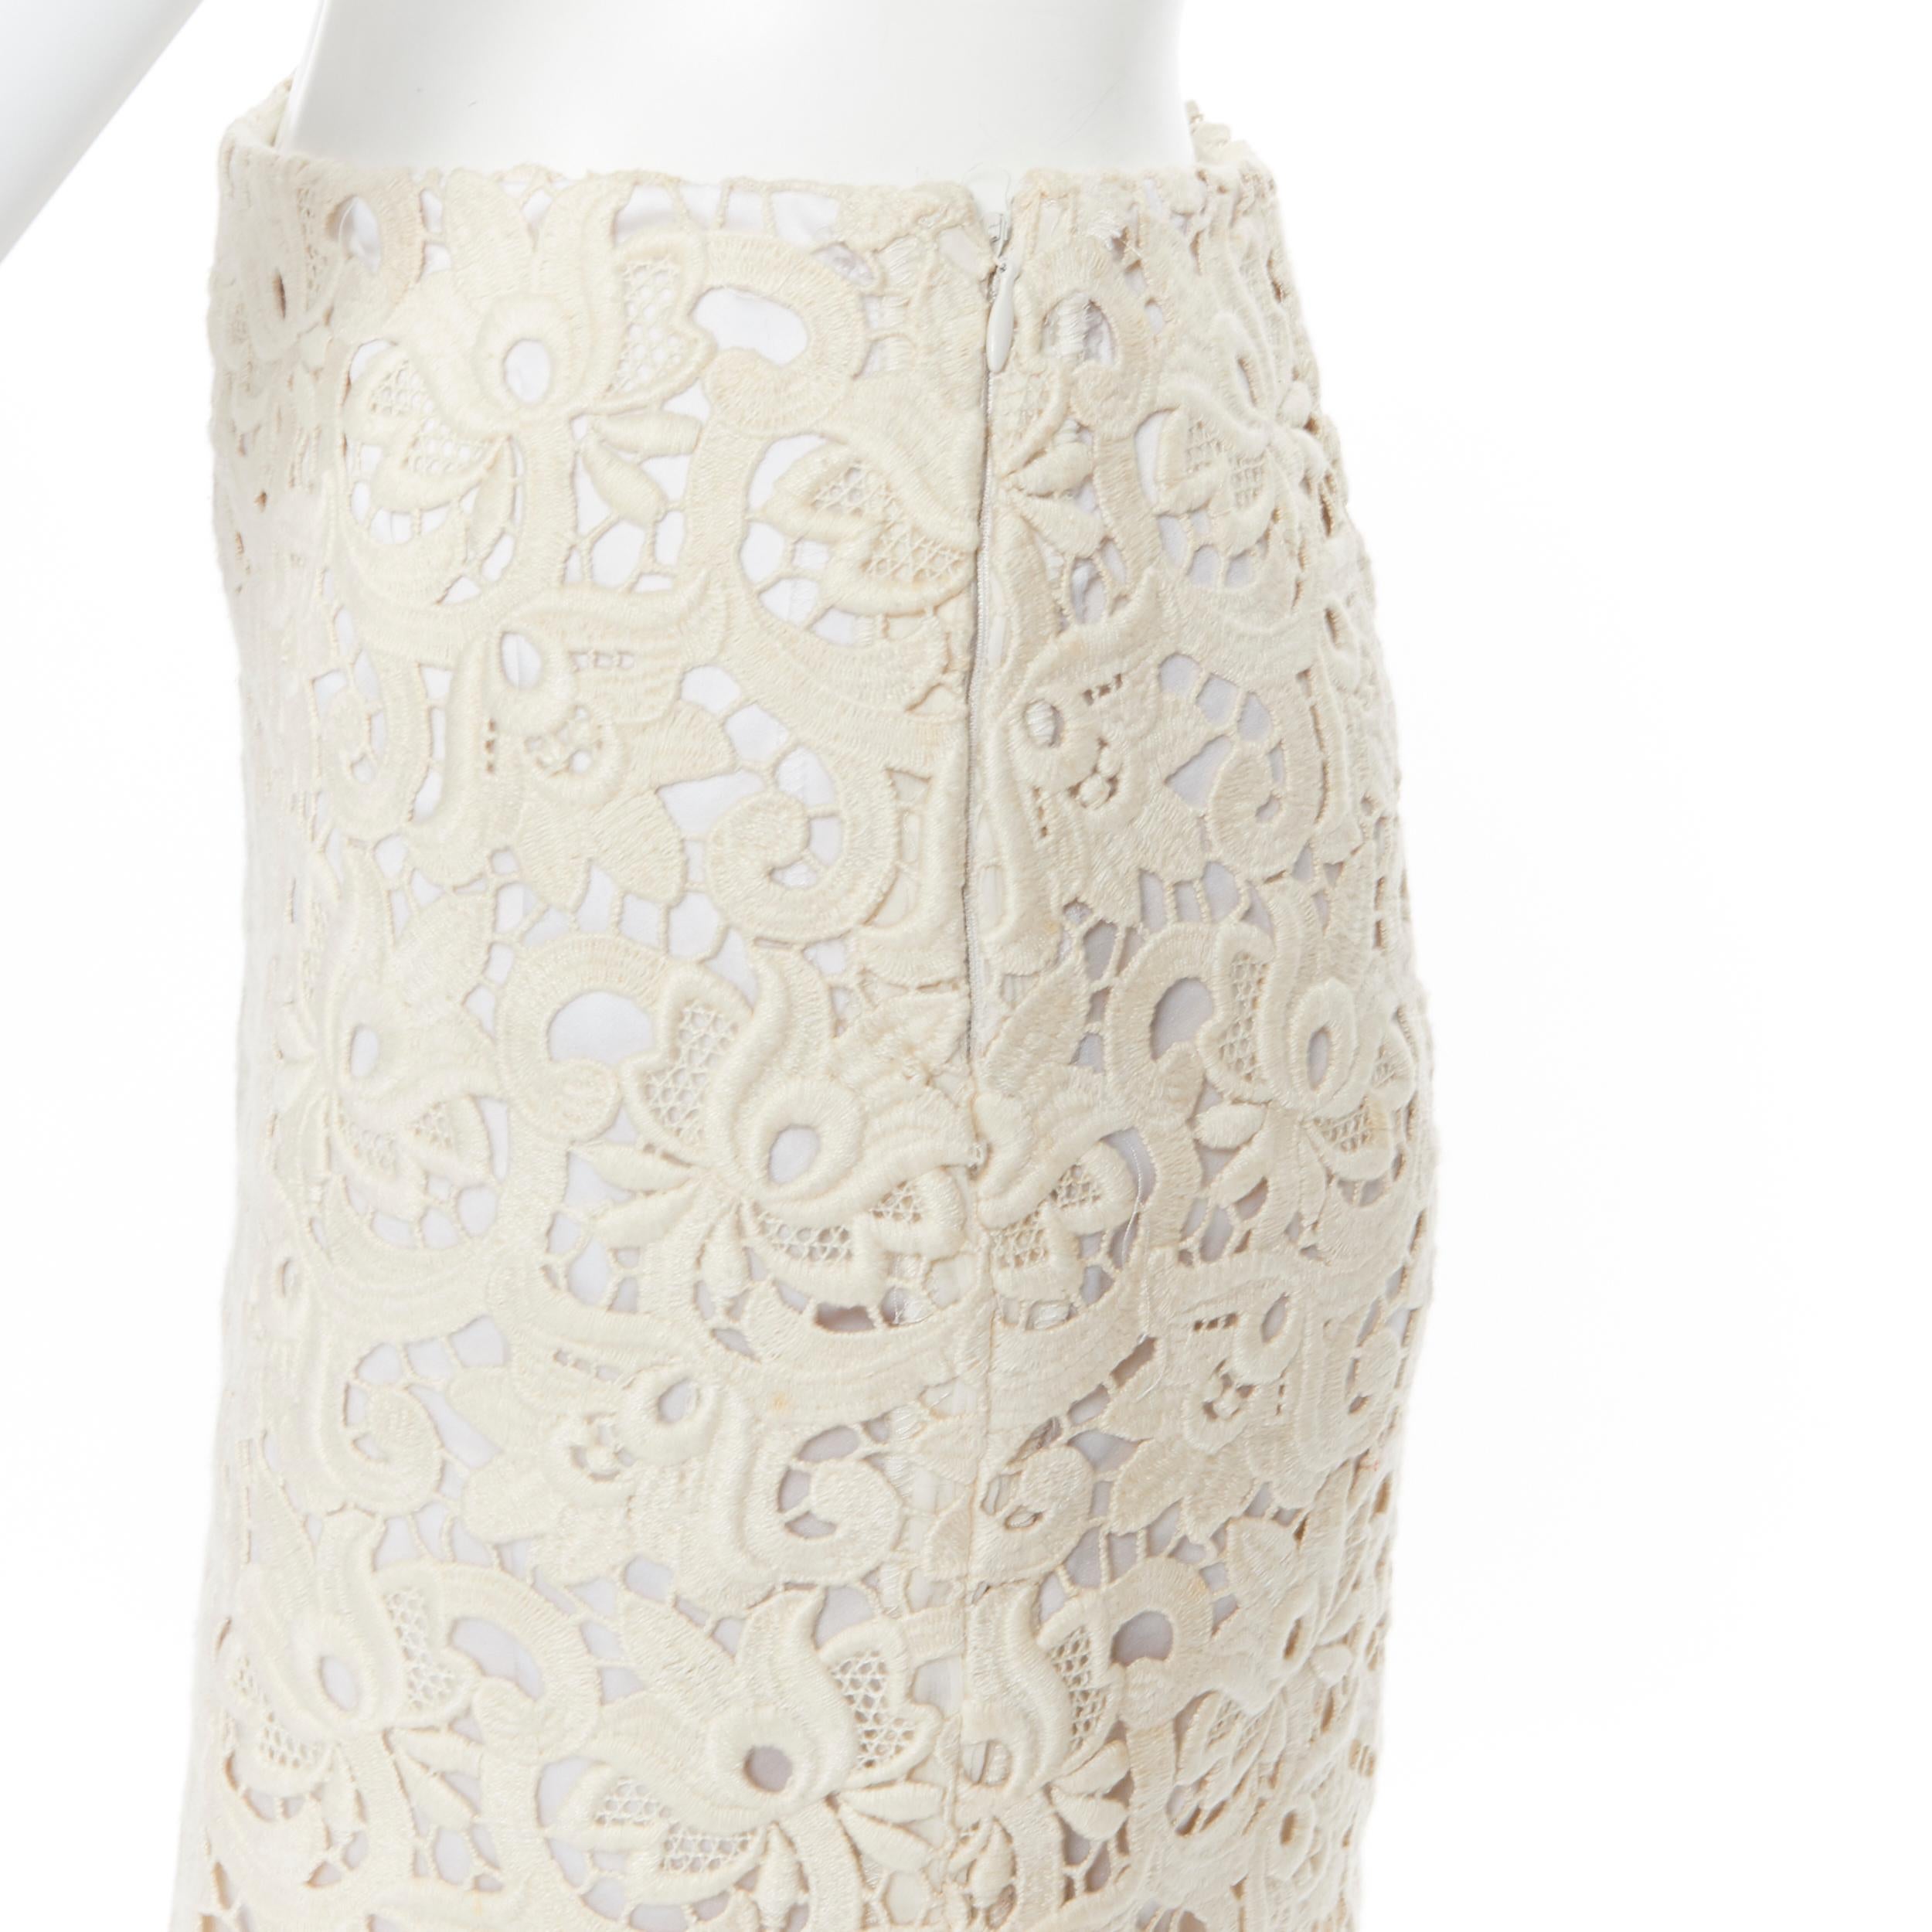 MICHAEL KORS COLLECTION beige embroidered lace fited skirt US2 26